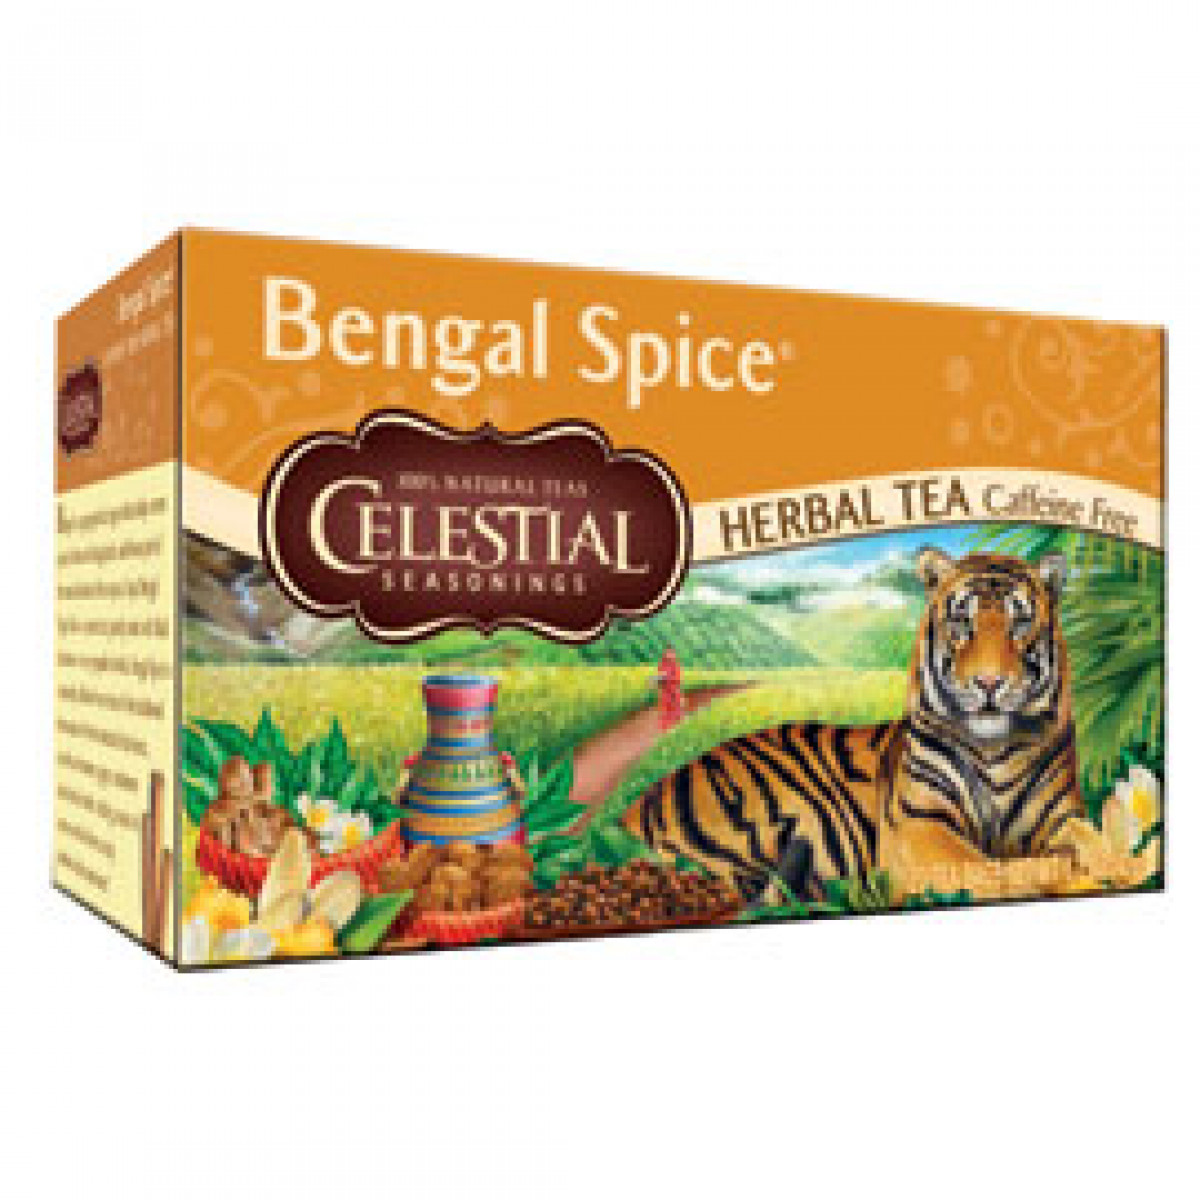 Product picture for Bengal Spice Teabags